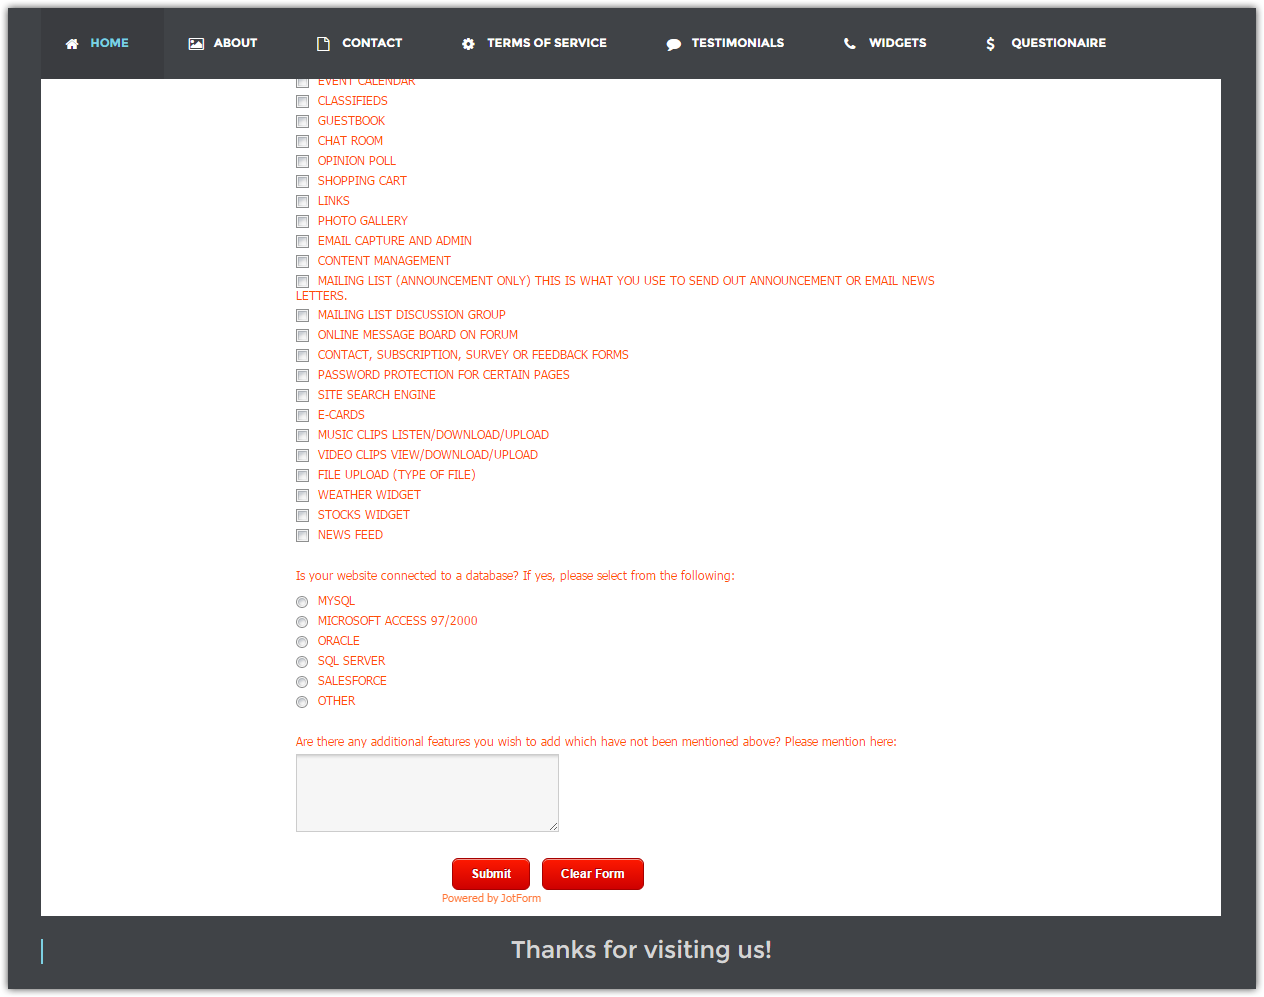 My published form continues to add multiple Powered by JotForm links Image 1 Screenshot 20